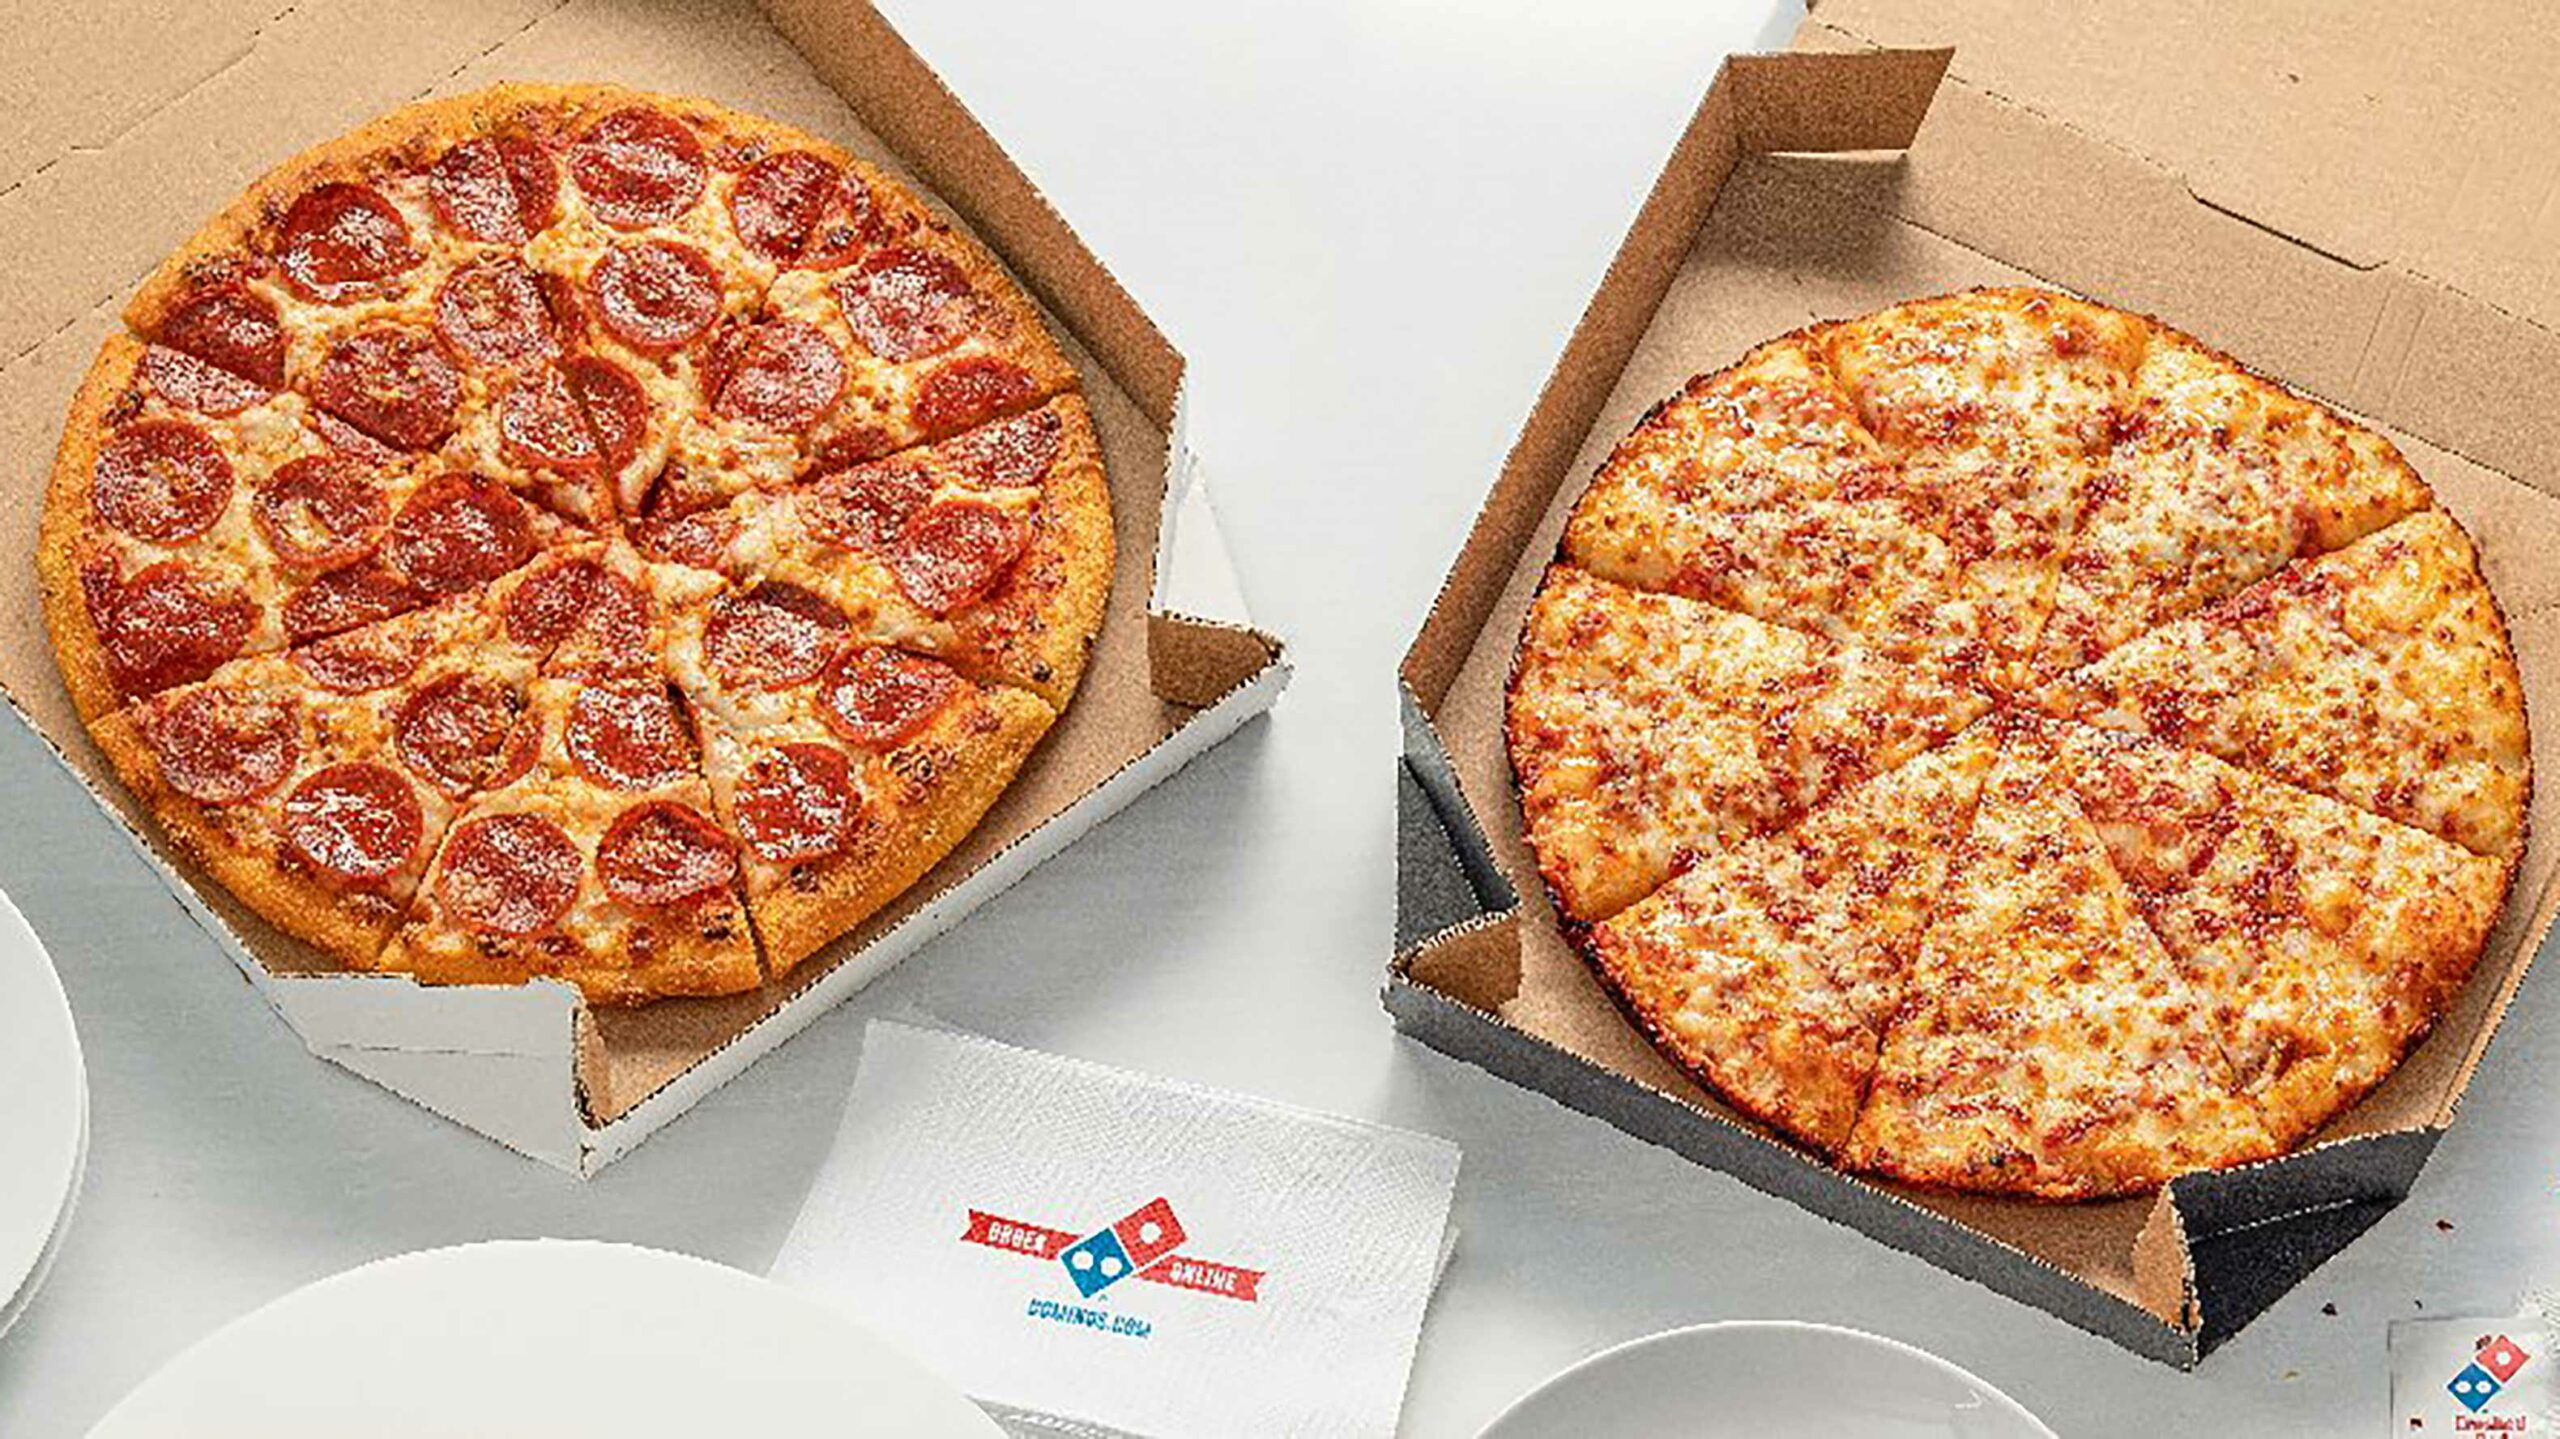 People are still ordering pizza from the Wii for some reason